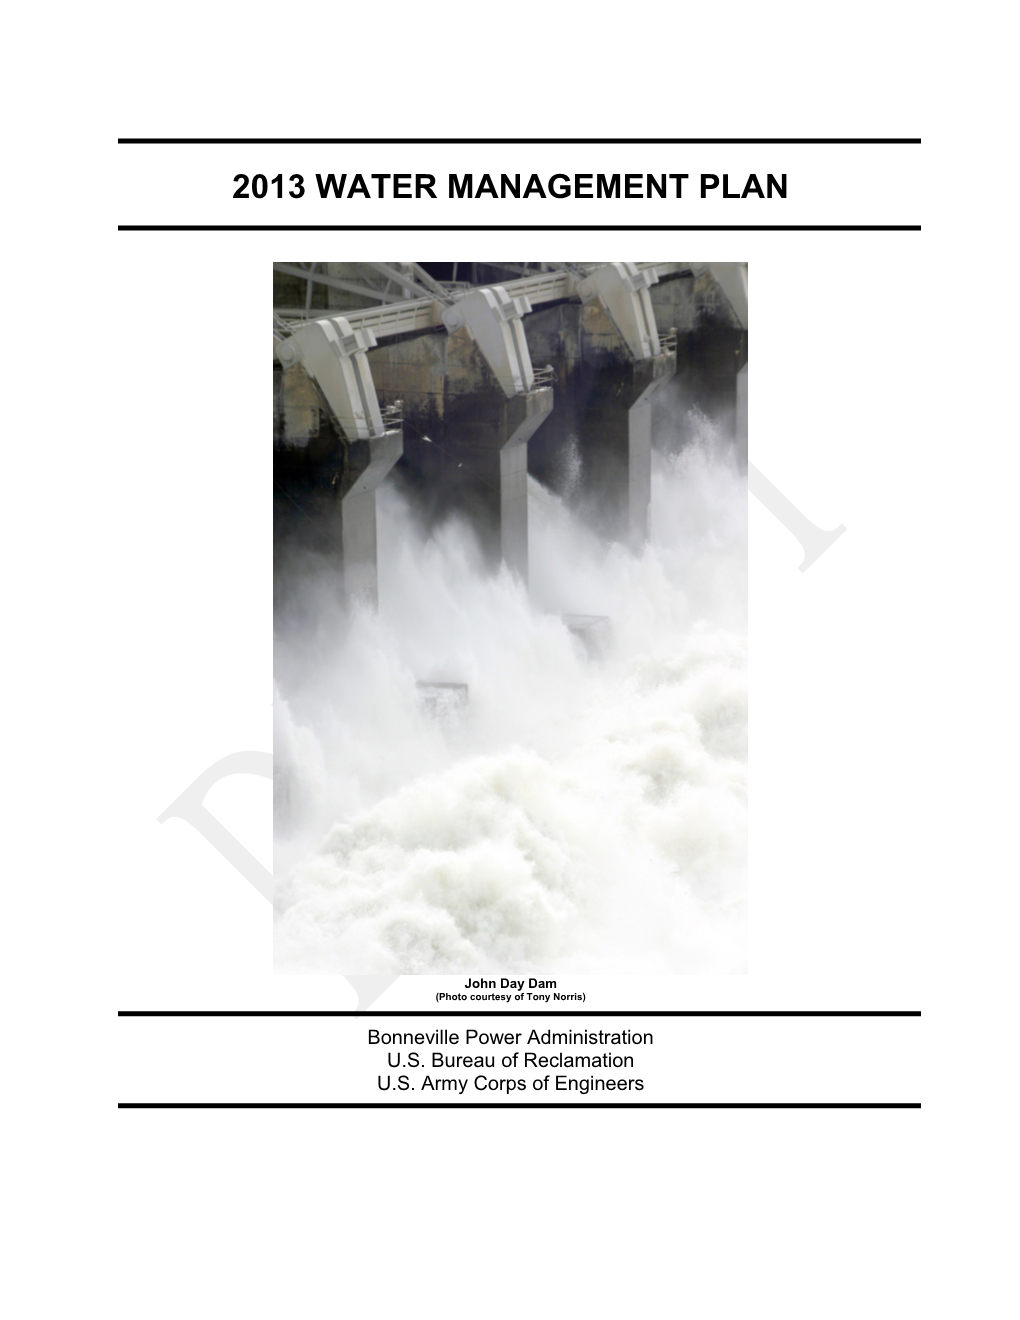 20101207 Updated Draft 2011 Water Management Plan with Comments from USFWS, IDFG, and BPA